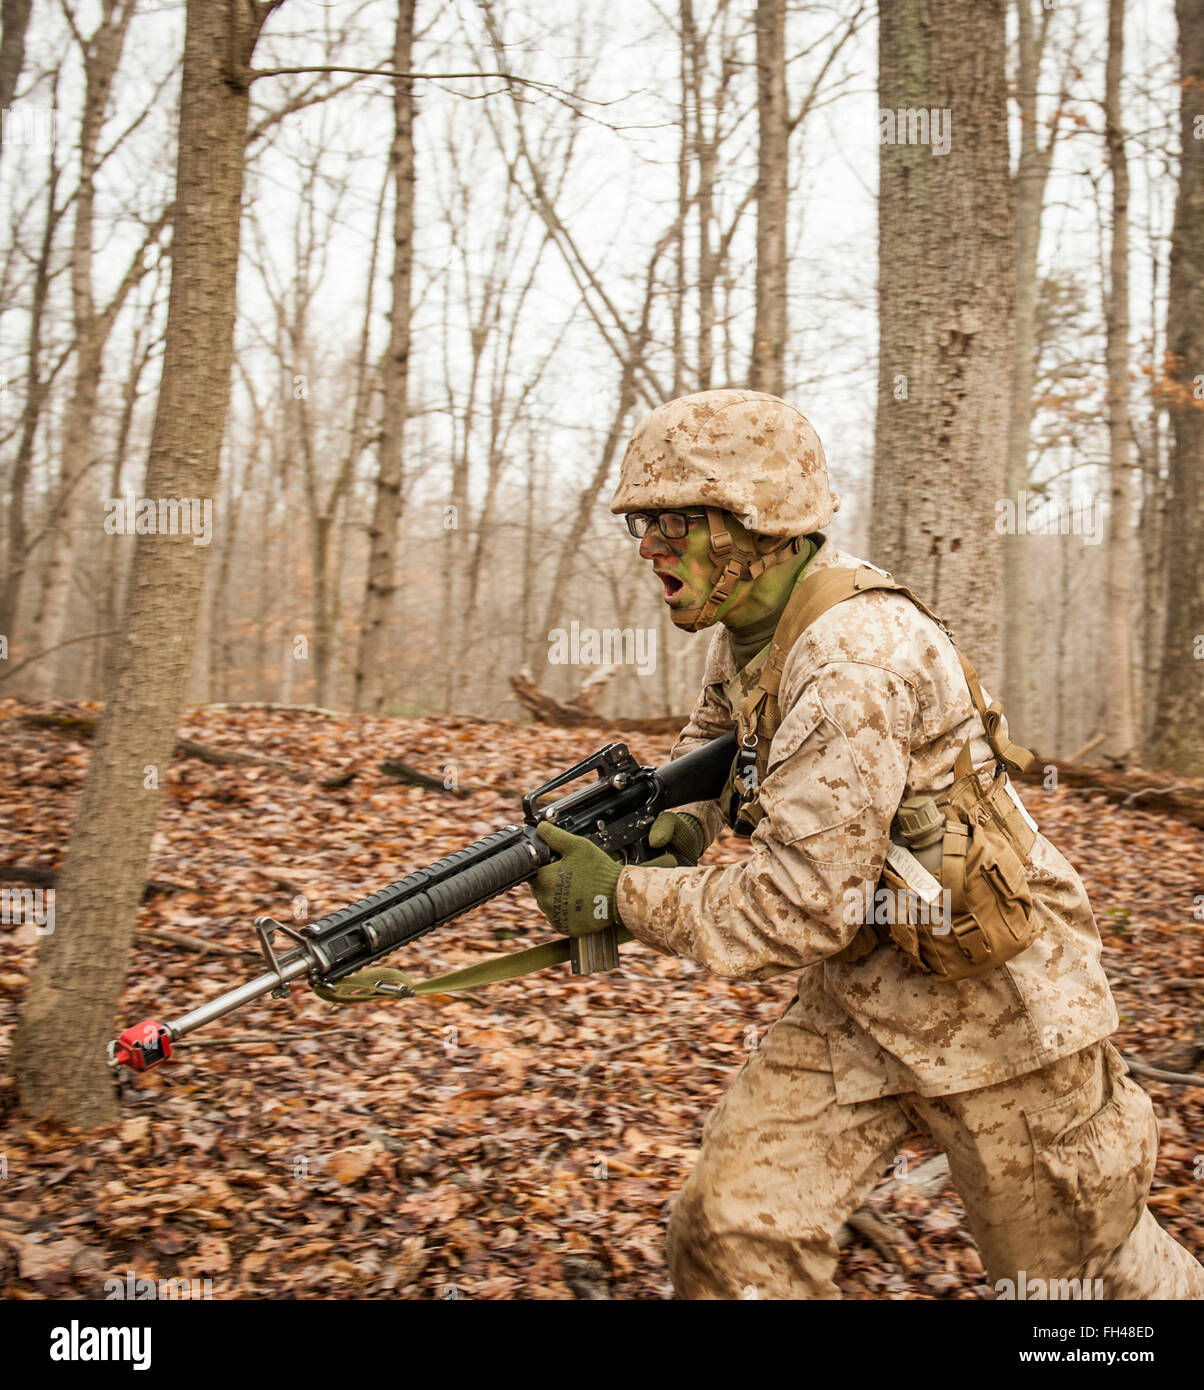 Candidates assigned to Delta Company, Officer Candidates Class-221, are evaluated as members of a fire team during the Small Unit Leadership Evaluation 1 at Brown Field, Marine Corps Base Quantico, Va., on Feb. 22, 2016. The mission of Officer Candidates School (OCS) is to 'educate and train officer candidates in Marine Corps knowledge and skills within a controlled, challenging, and chaotic environment in order to evaluate and screen individuals for the leadership, moral, mental, and physical qualities required for commissioning as a Marine Corps officer.' Stock Photo